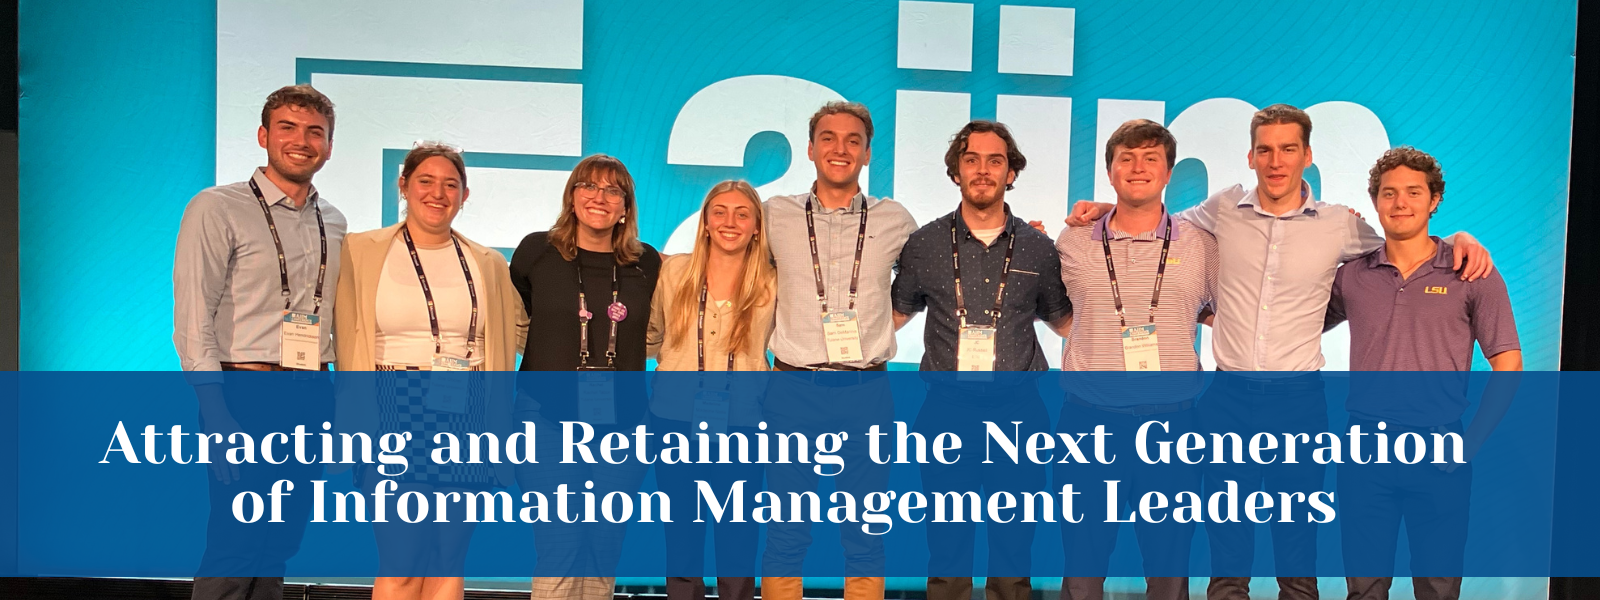 Attracting and Retaining the Next Generation of Information Management Leaders